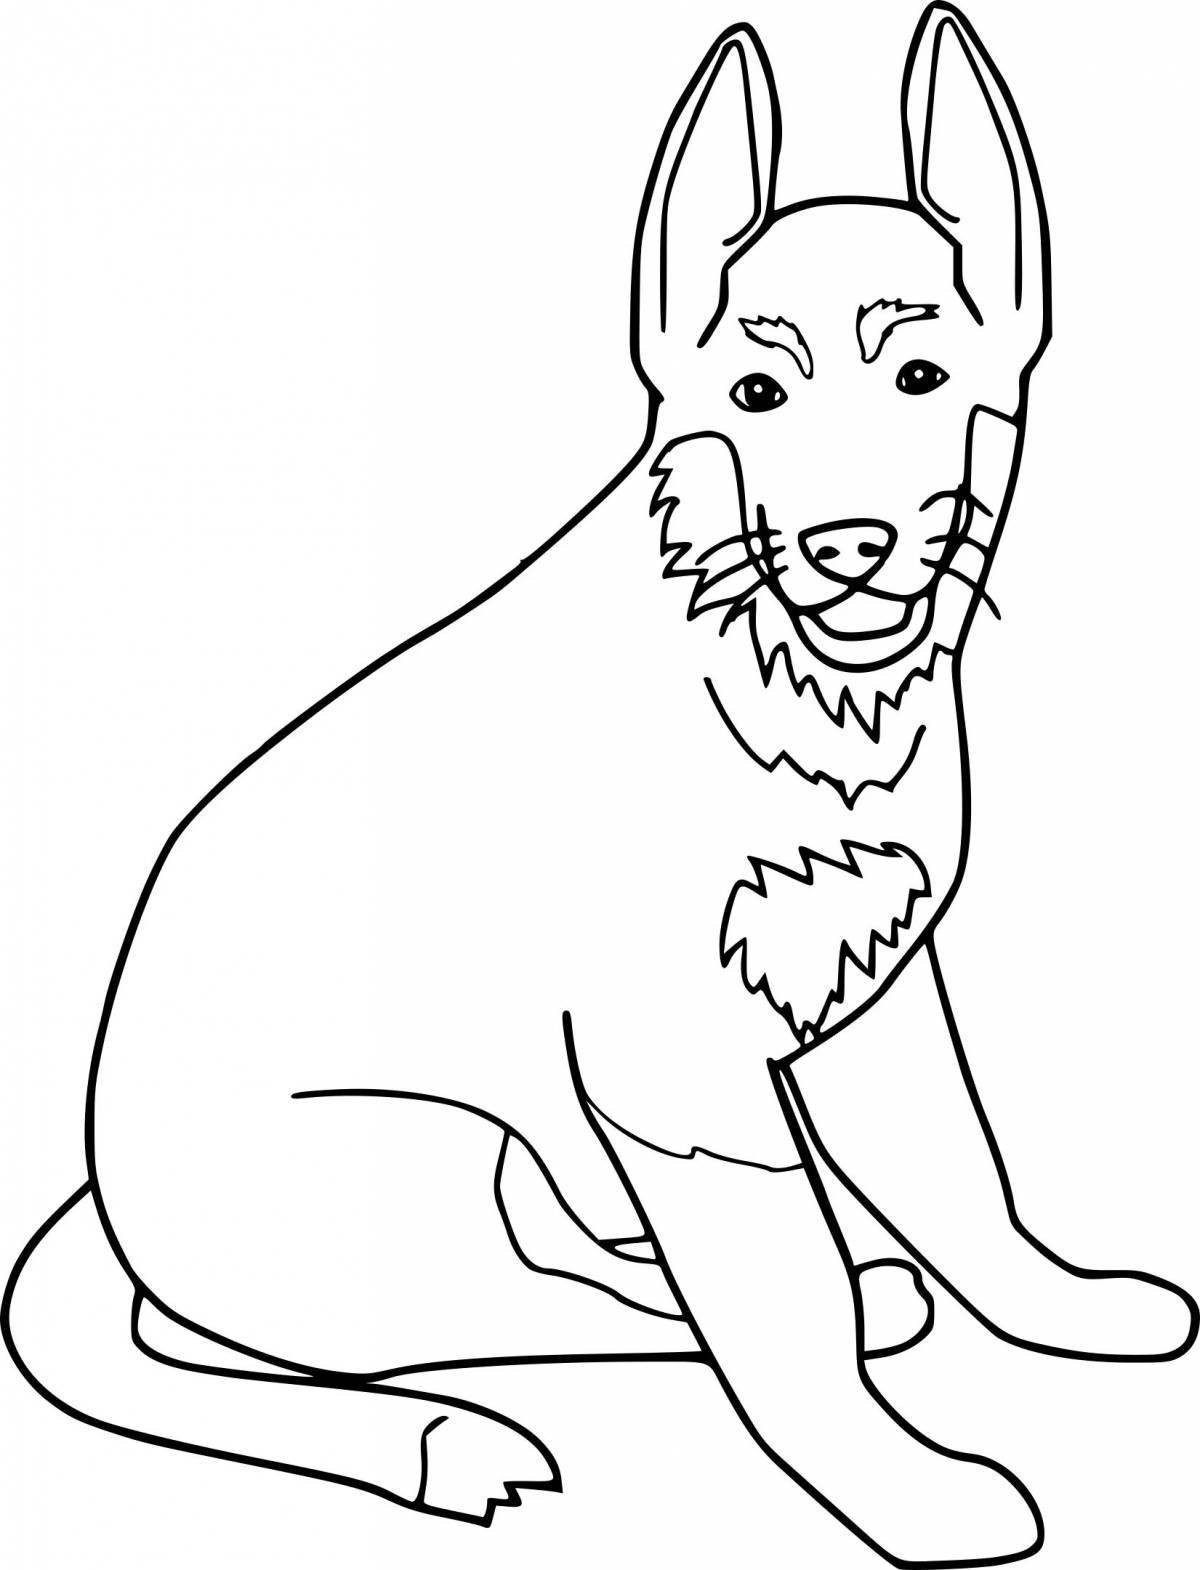 Animated German Shepherd Coloring Page for Kids